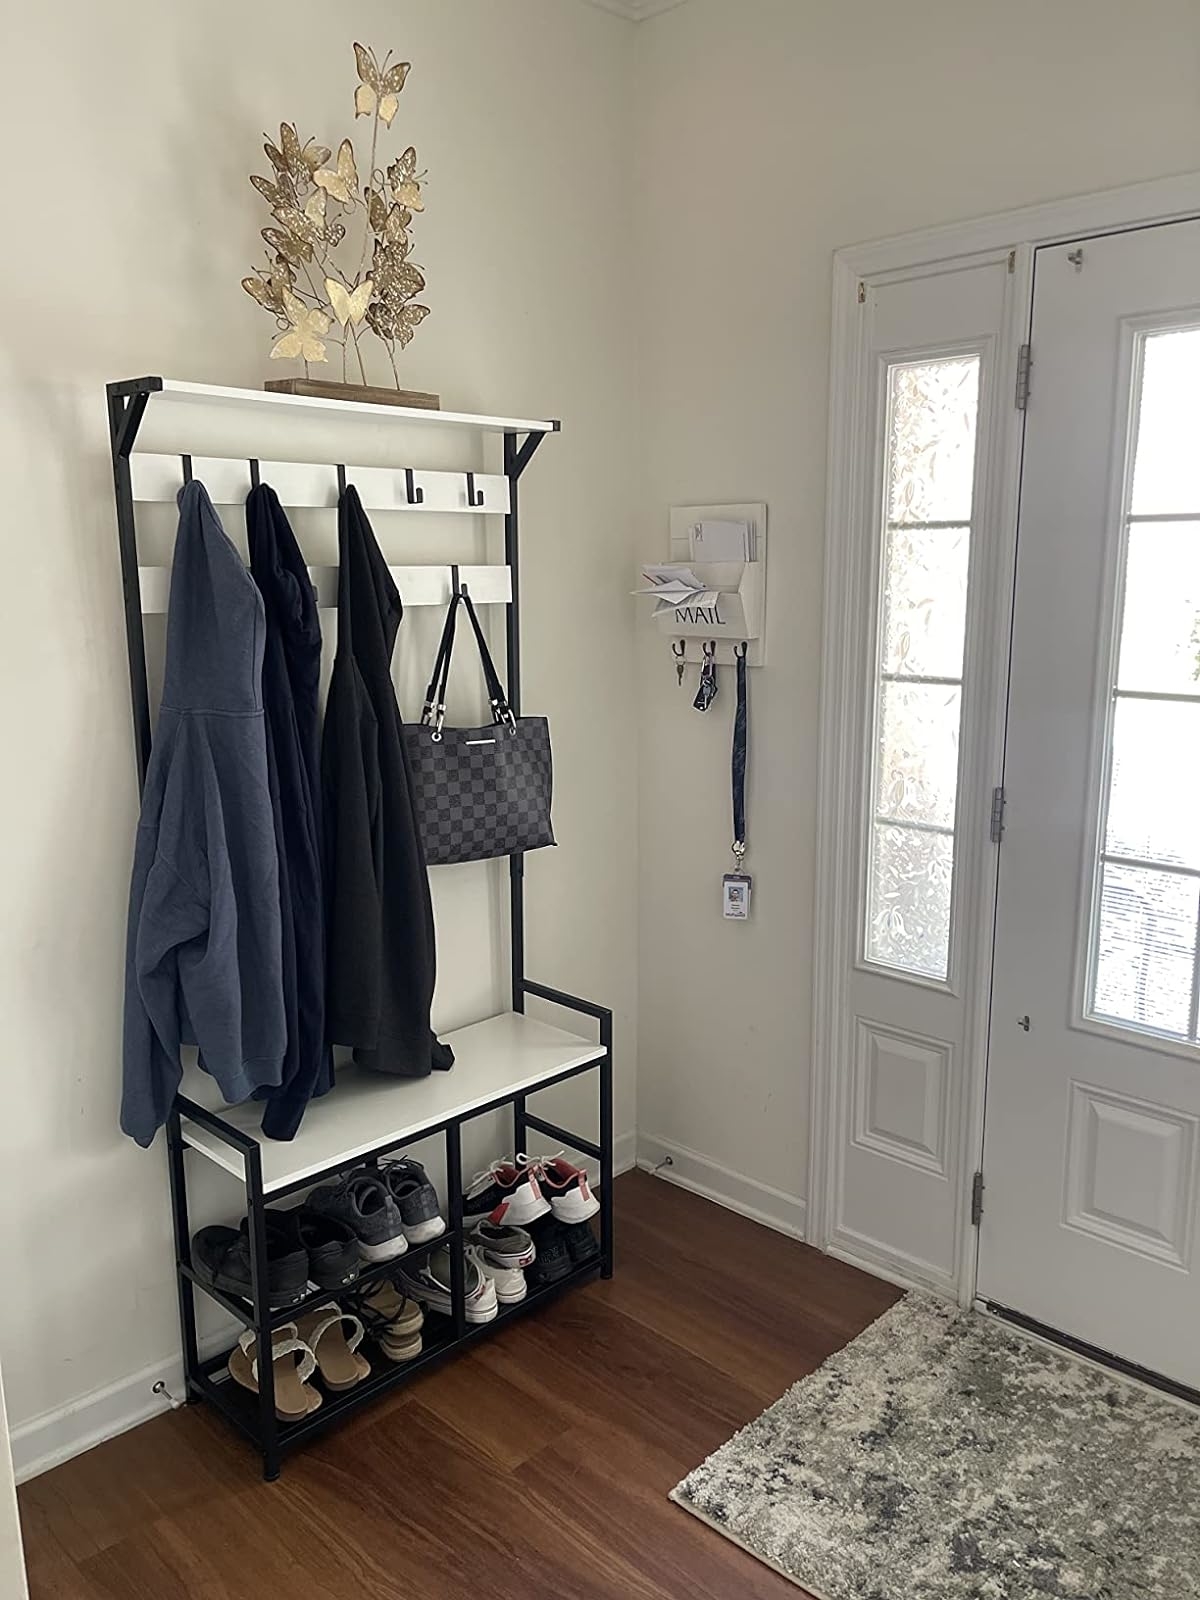 An organized entryway with a coat rack, a shelving unit with shoes, wall decor, and a door